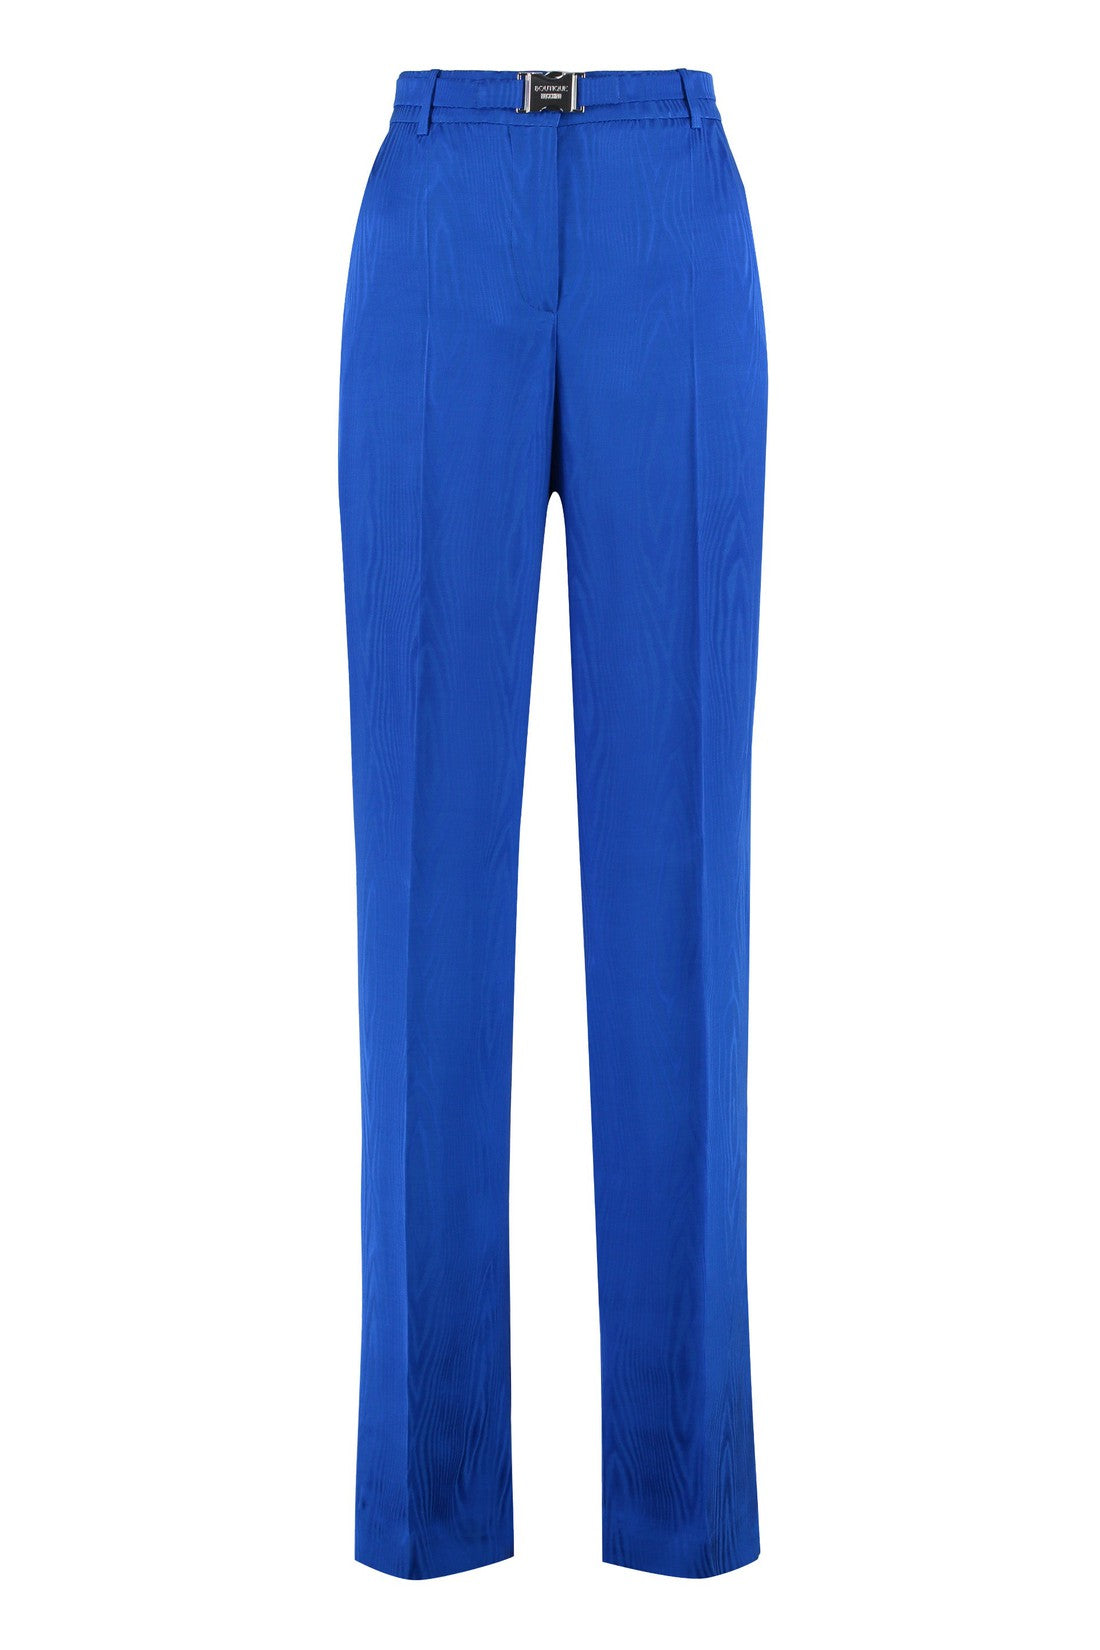 Boutique Moschino-OUTLET-SALE-Straight-leg trousers-ARCHIVIST